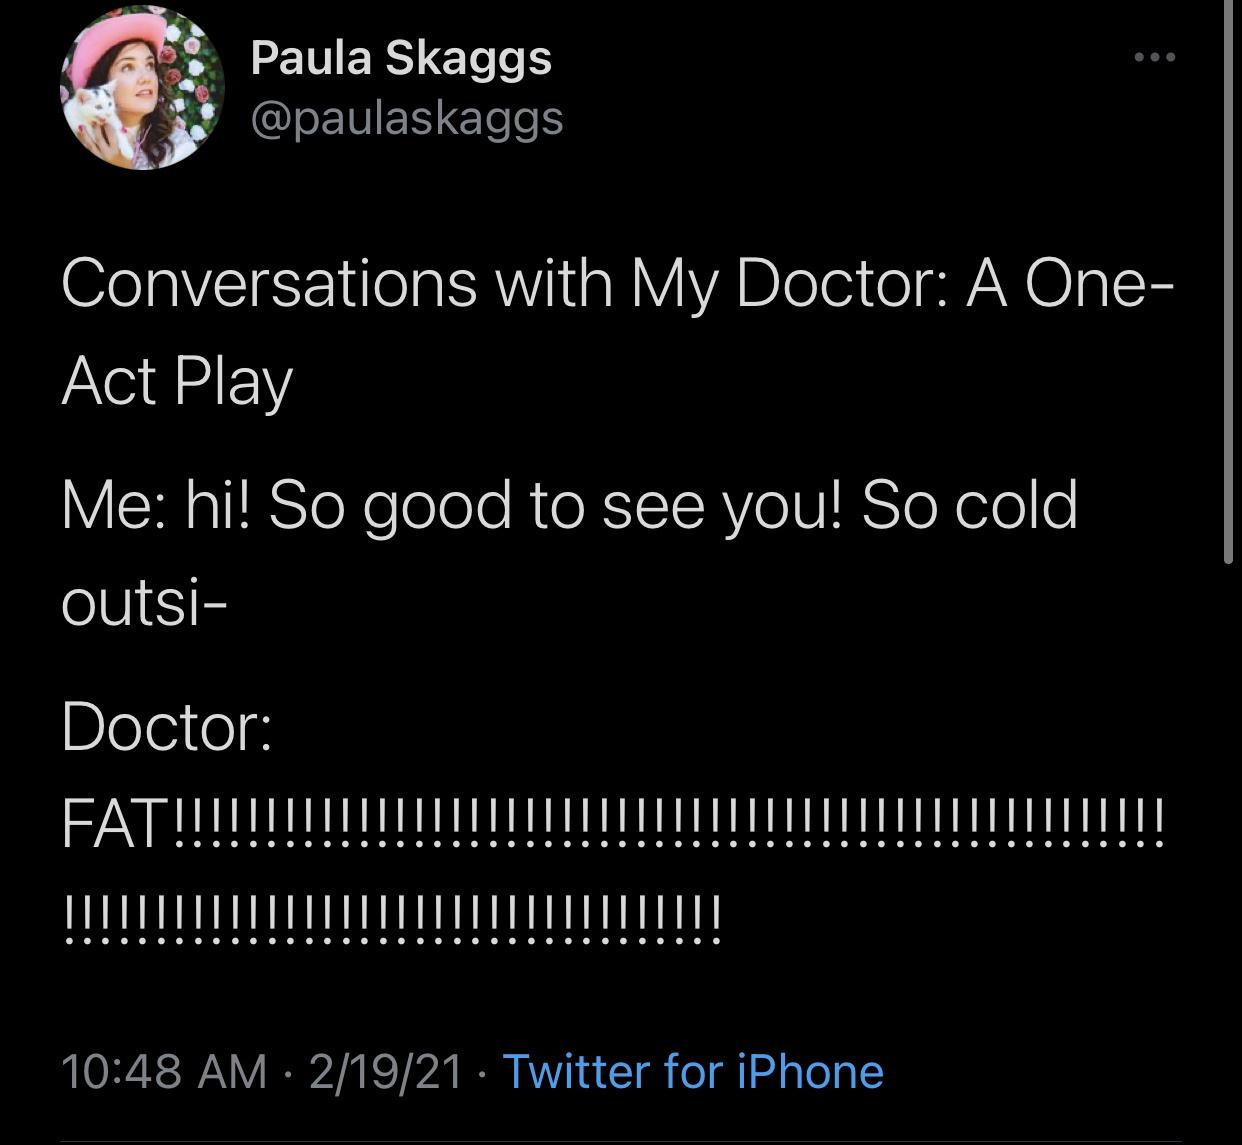 screenshot - @ @ Paula Skaggs Conversations with My Doctor A One Act Play Me hi! So good to see you! So cold outsi Doctor Fat!!!!! 21921 Twitter for iPhone